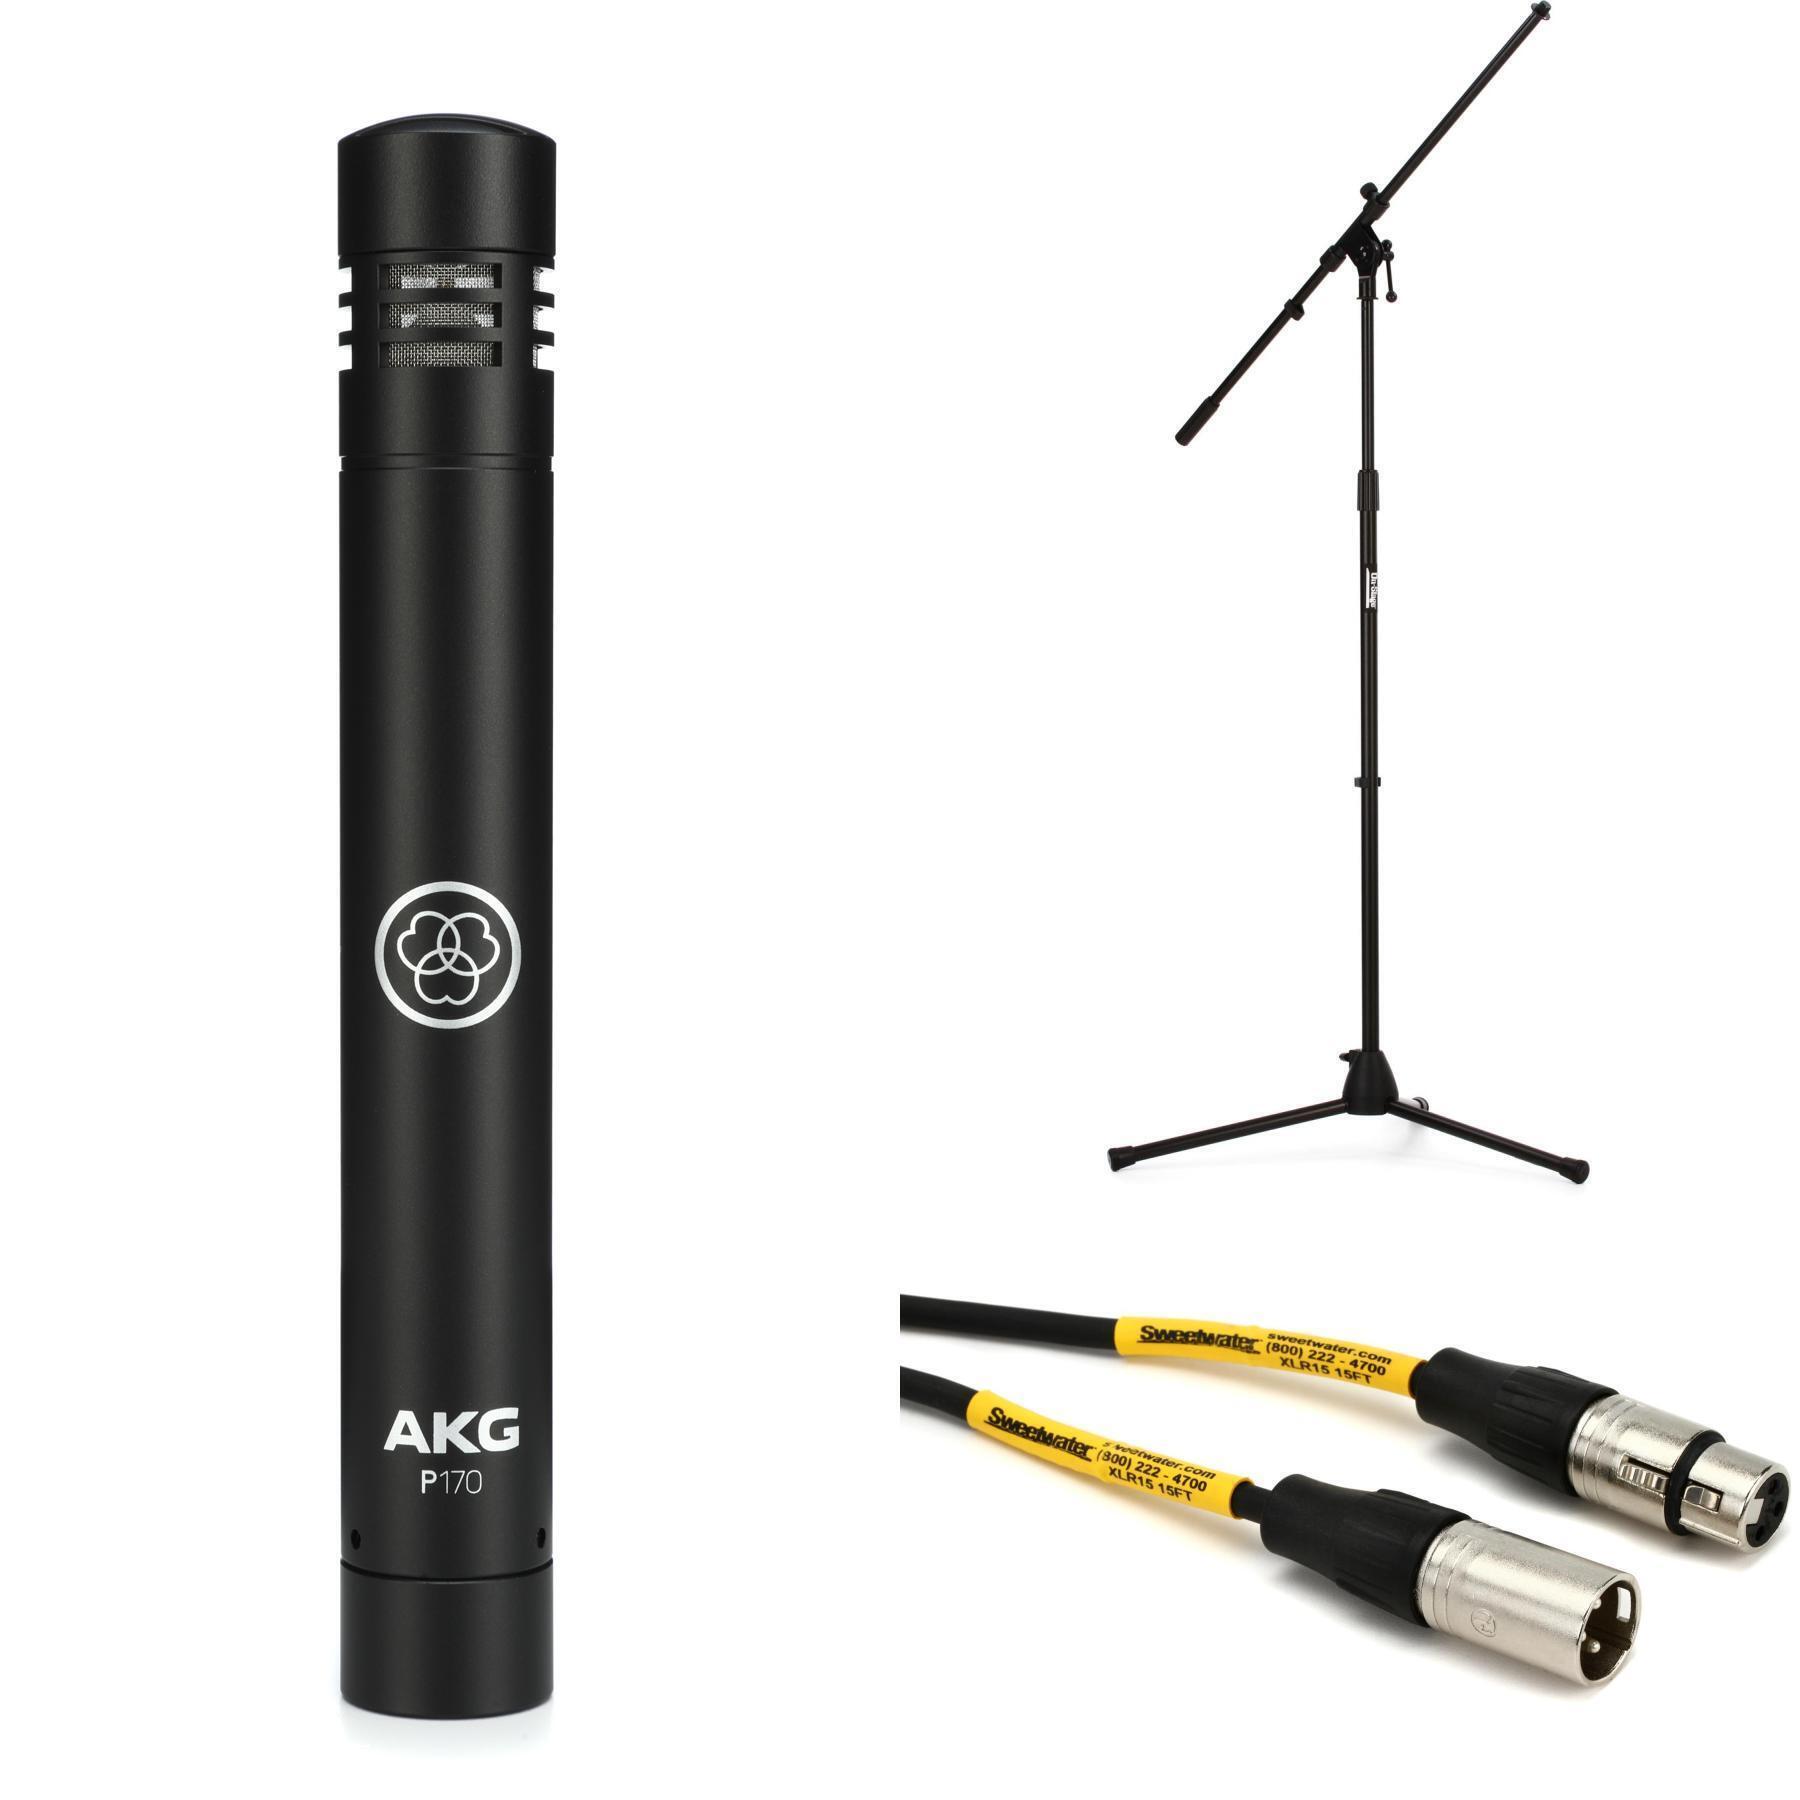 AKG P170 Small-diaphragm Condenser Microphone Bundle with Stand and Cable